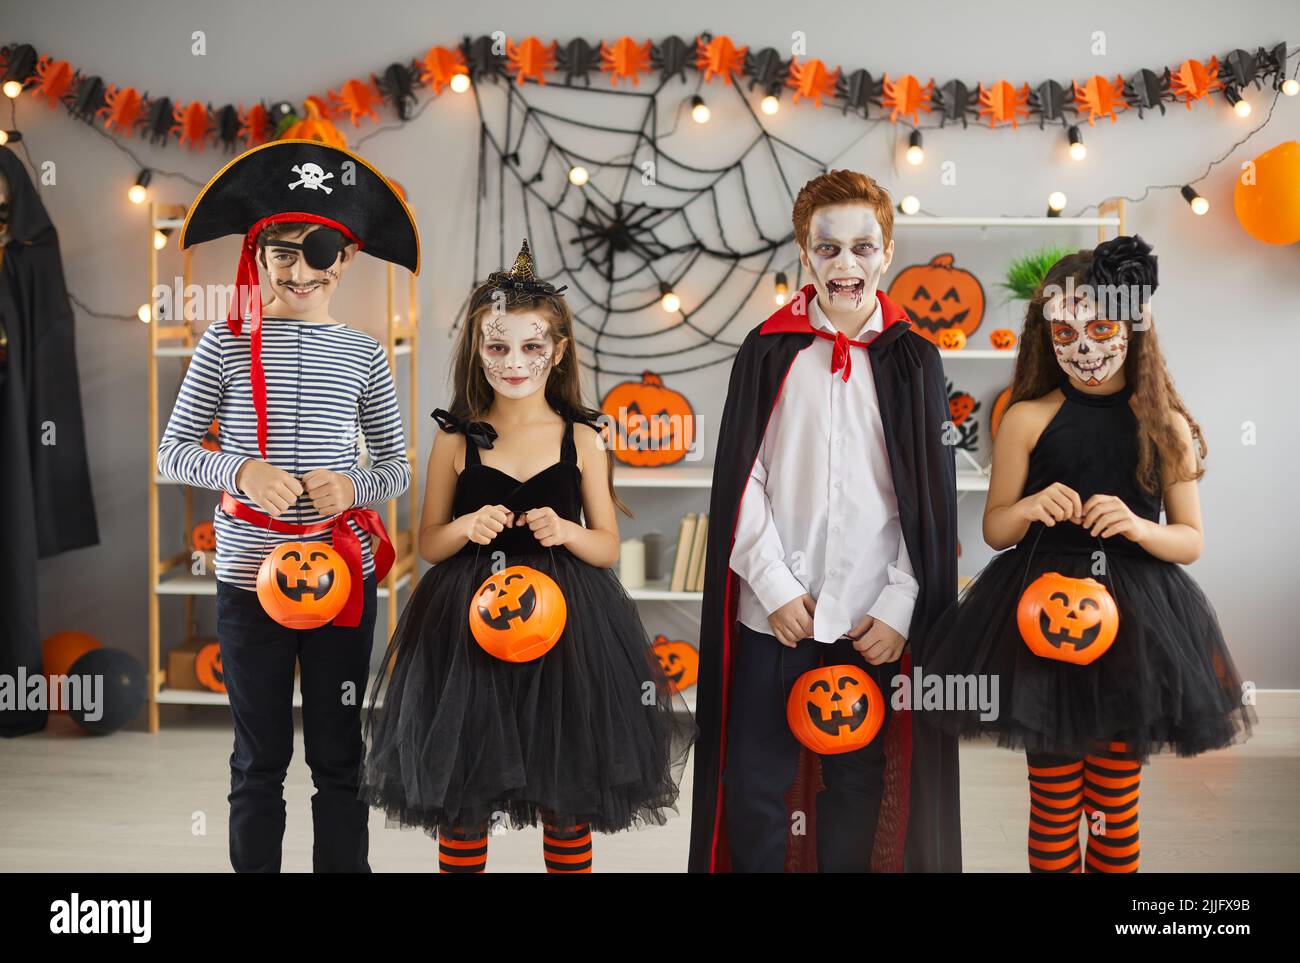 Group of children in different spooky Halloween costumes holding pumpkin baskets Stock Photo